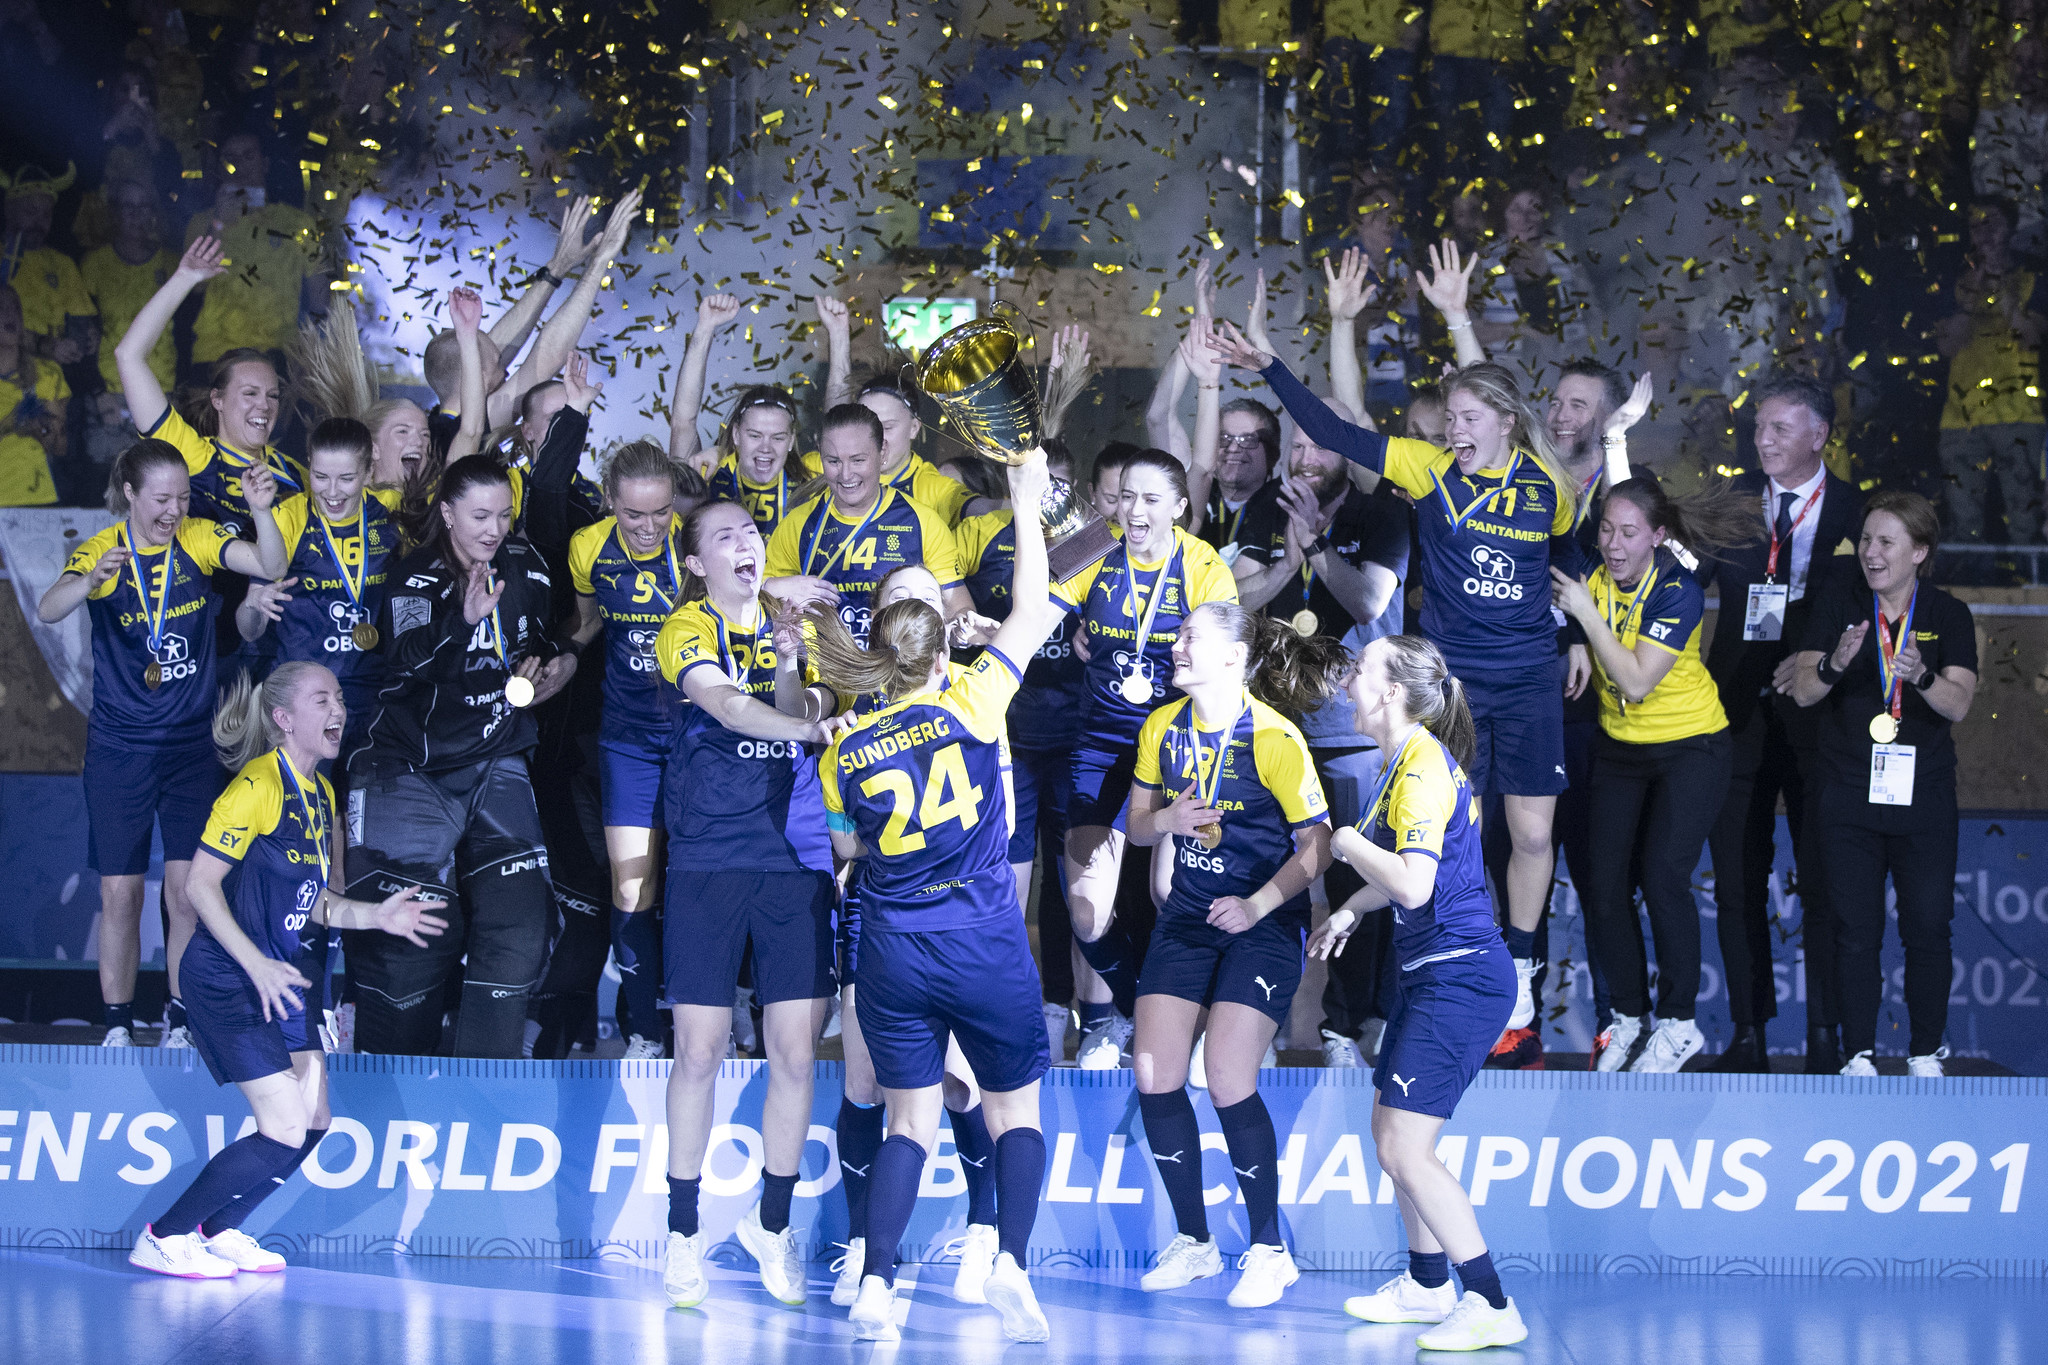 Sweden have won the Women's World Floorball Championships 10 times, including in Uppsala in 2021 ©IFF